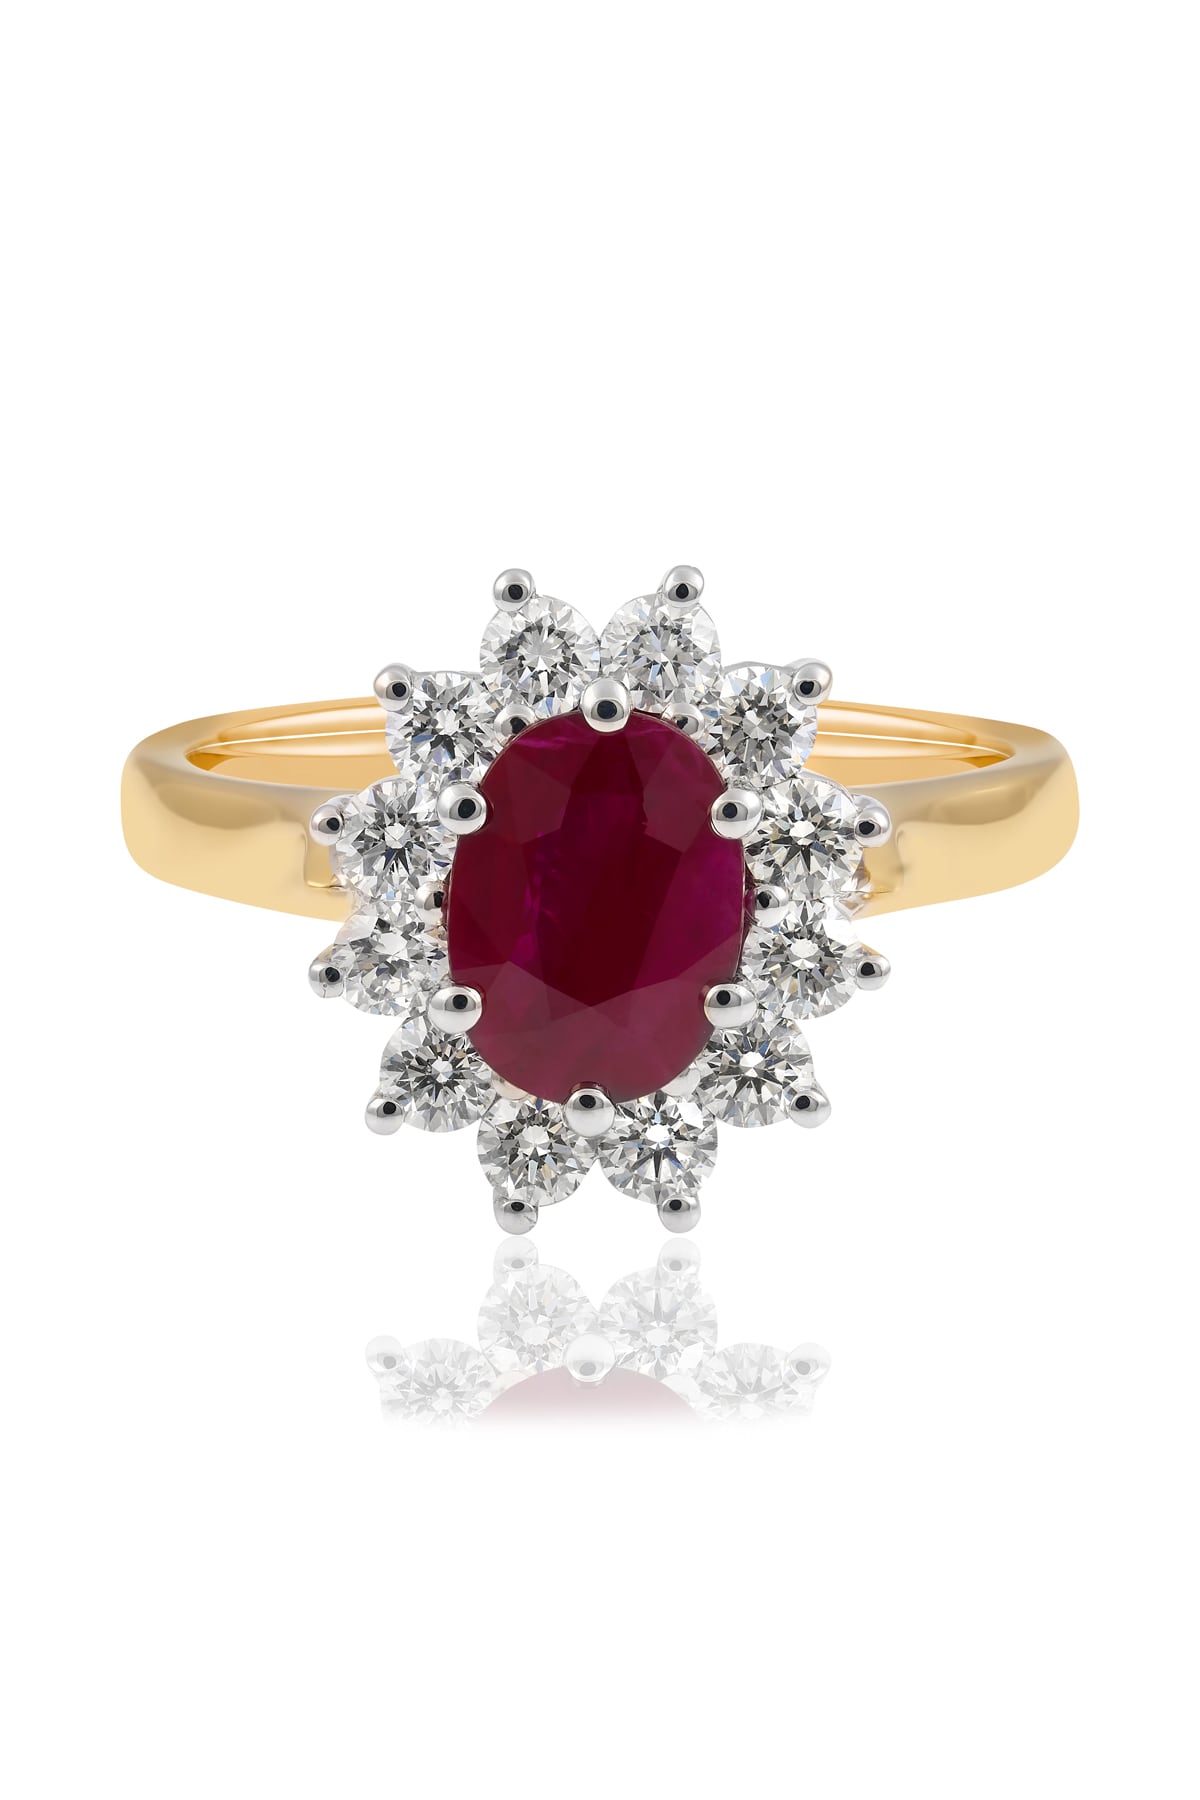 1.30 Carat Oval Natural Burmese Ruby & Diamond Cluster Ring from LeGassick Jewellery.